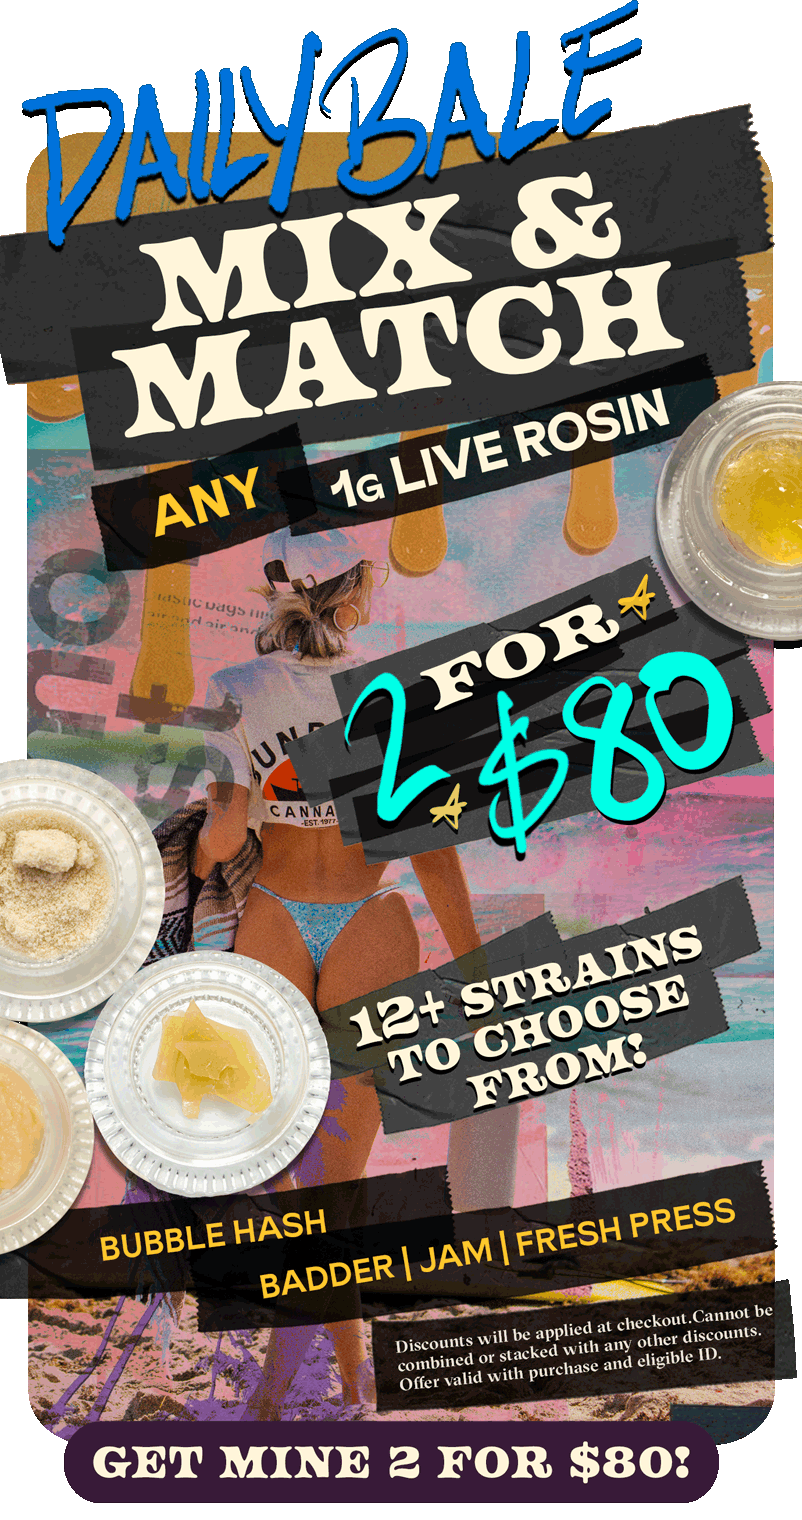 Daily Bale Mix&Match Any 1G Live Rosin 2for$80 MayWeek1 2